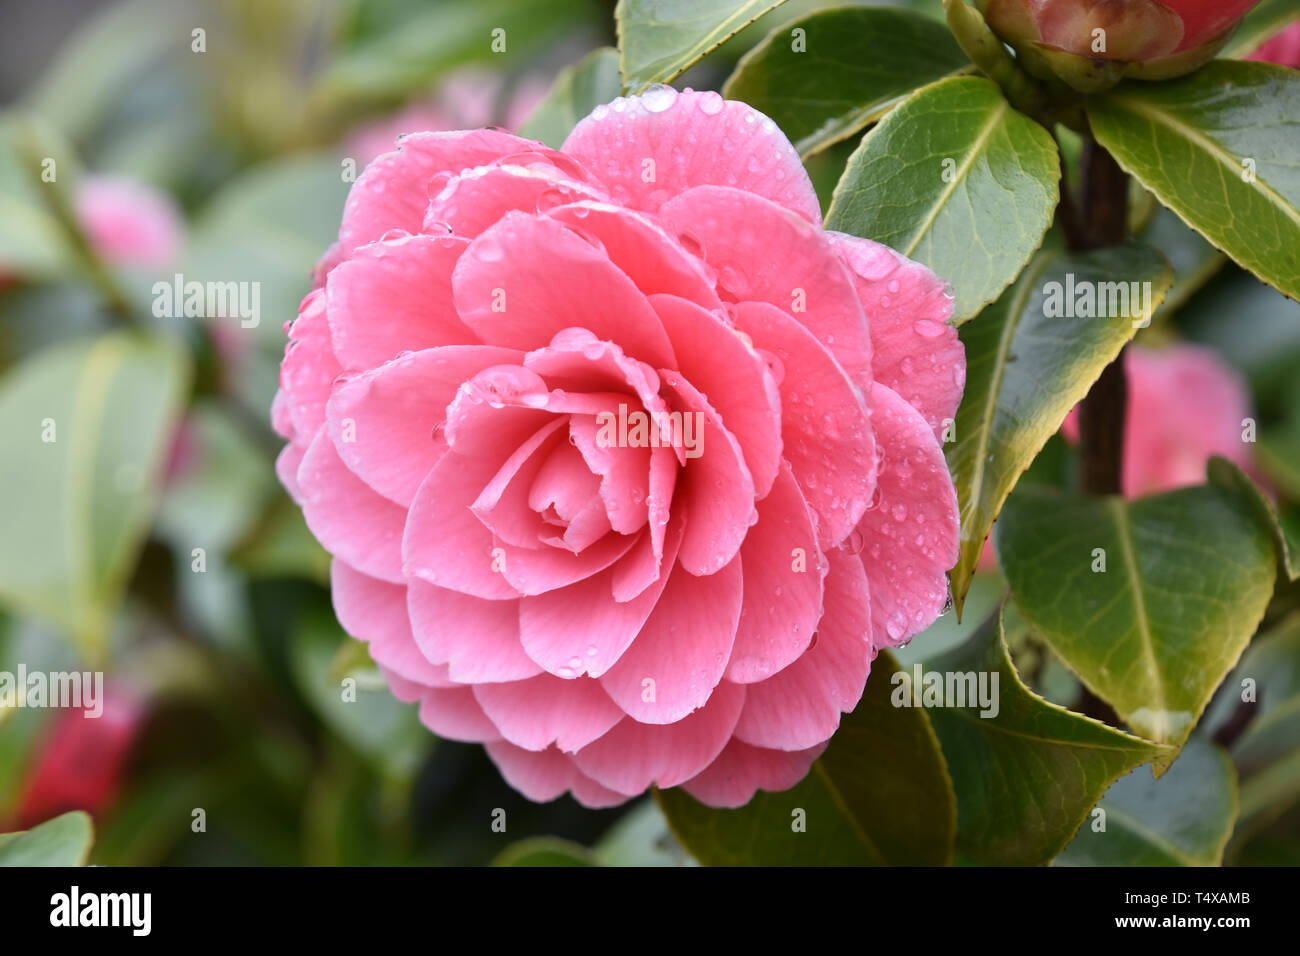 Pink Camellia flower with raindrops on petals, after rain, close-up Stock Photo